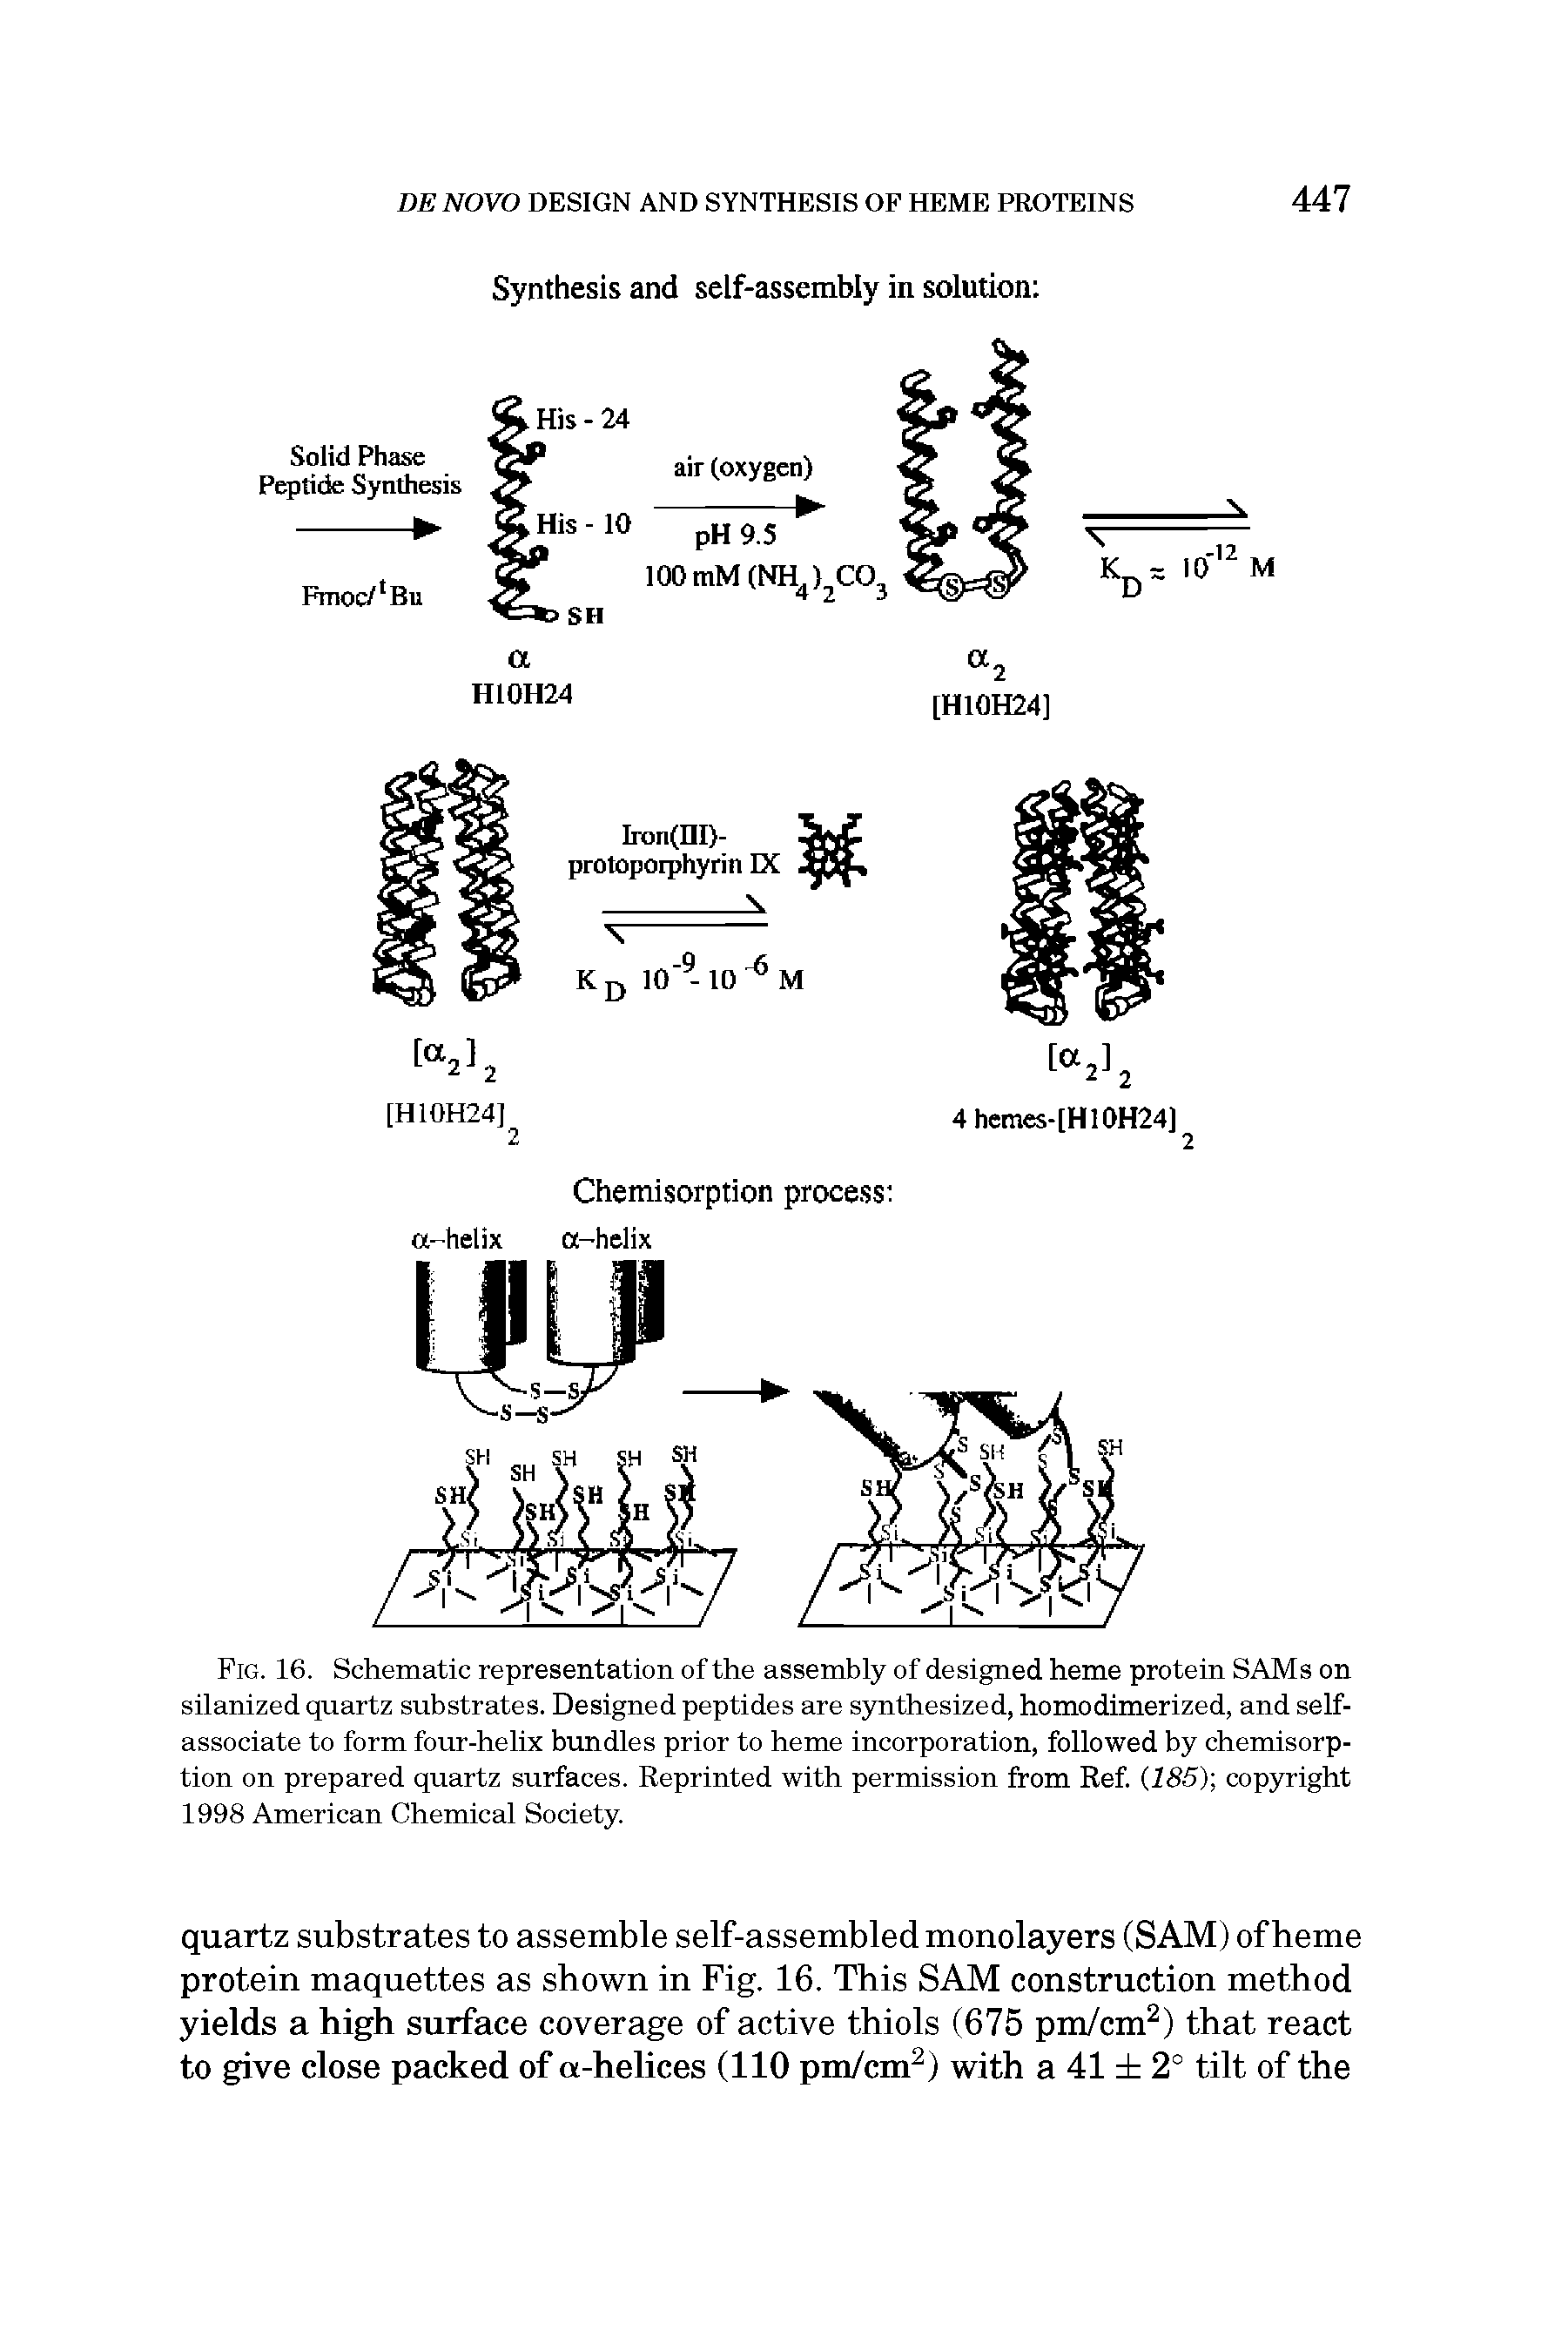 Fig. 16. Schematic representation of the assembly of designed heme protein SAMs on silanized quartz substrates. Designed peptides are synthesized, homodimerized, and selfassociate to form four-helix bundles prior to heme incorporation, followed by chemisorption on prepared quartz surfaces. Reprinted with permission from Ref. (185) copyright 1998 American Chemical Society.